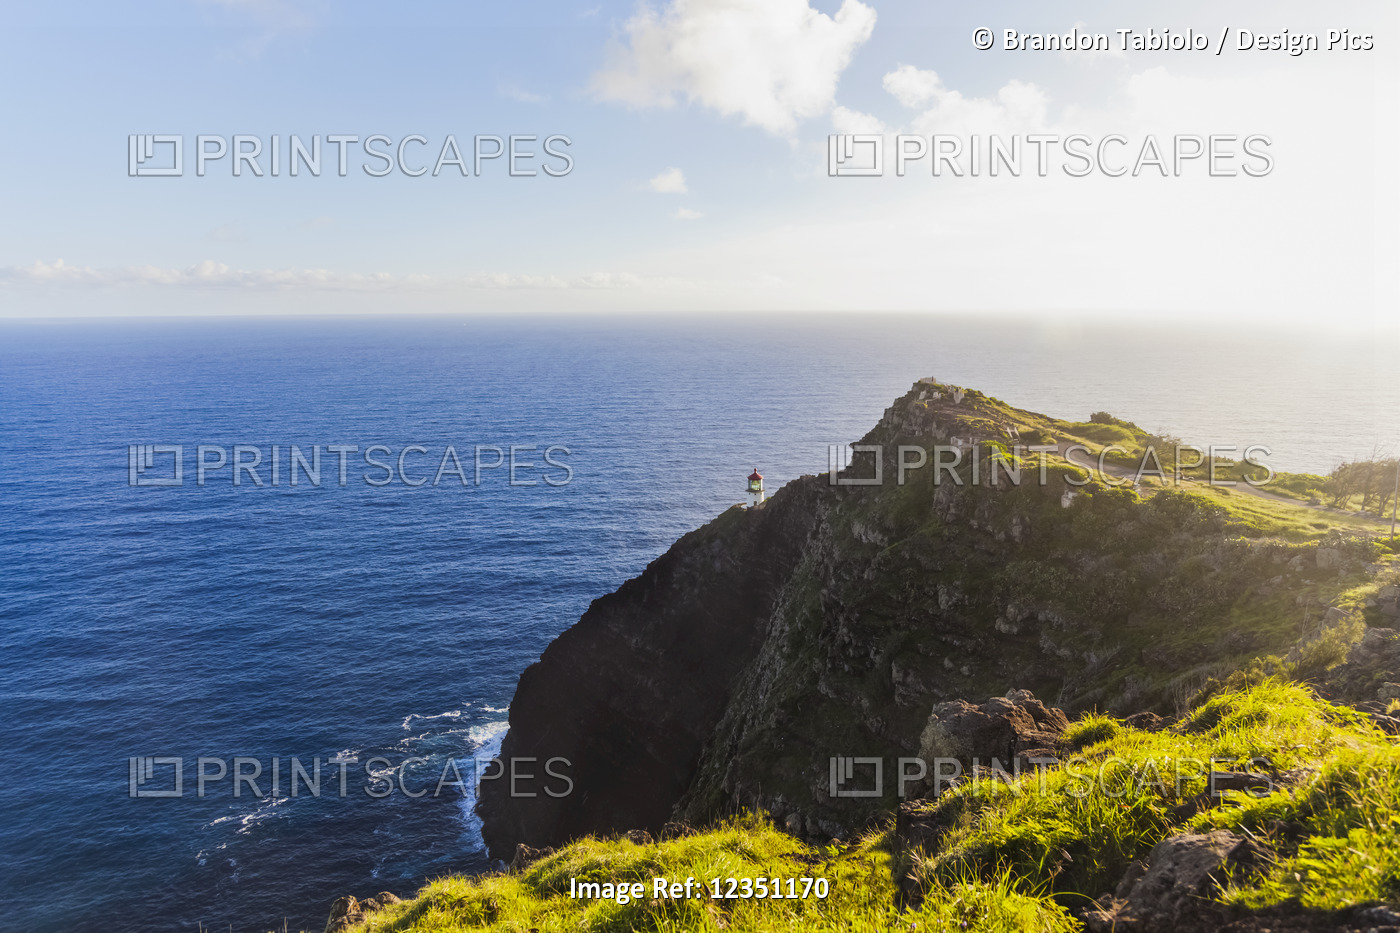 View of the Makapuu Lighthouse from the top of the Makapu'u Lighthouse Trail, ...